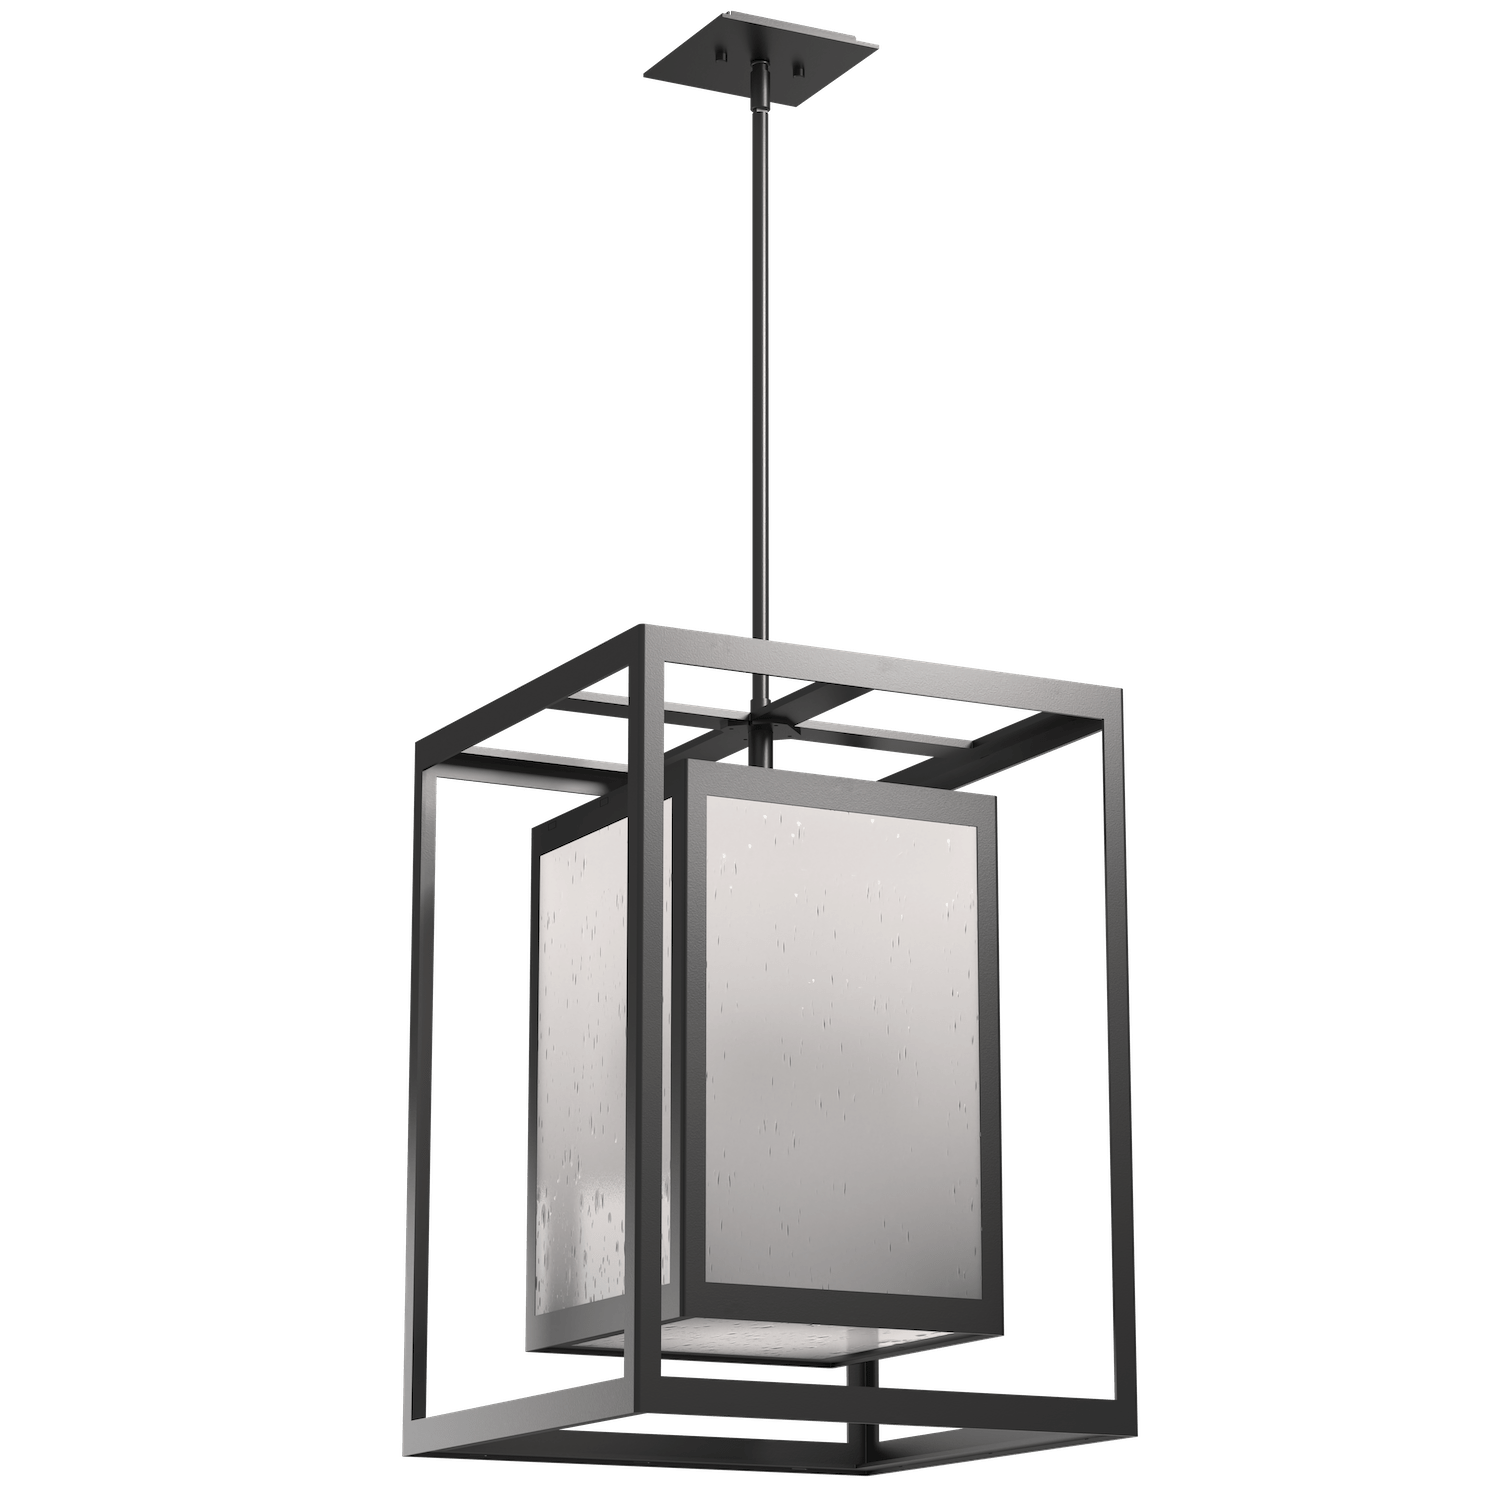 OPB0027-22-AG-FS-Hammerton-Studio-Double-Box-25-inch-outdoor-pendant-light-with-argento-grey-finish-and-frosted-glass-shade-and-LED-lamping